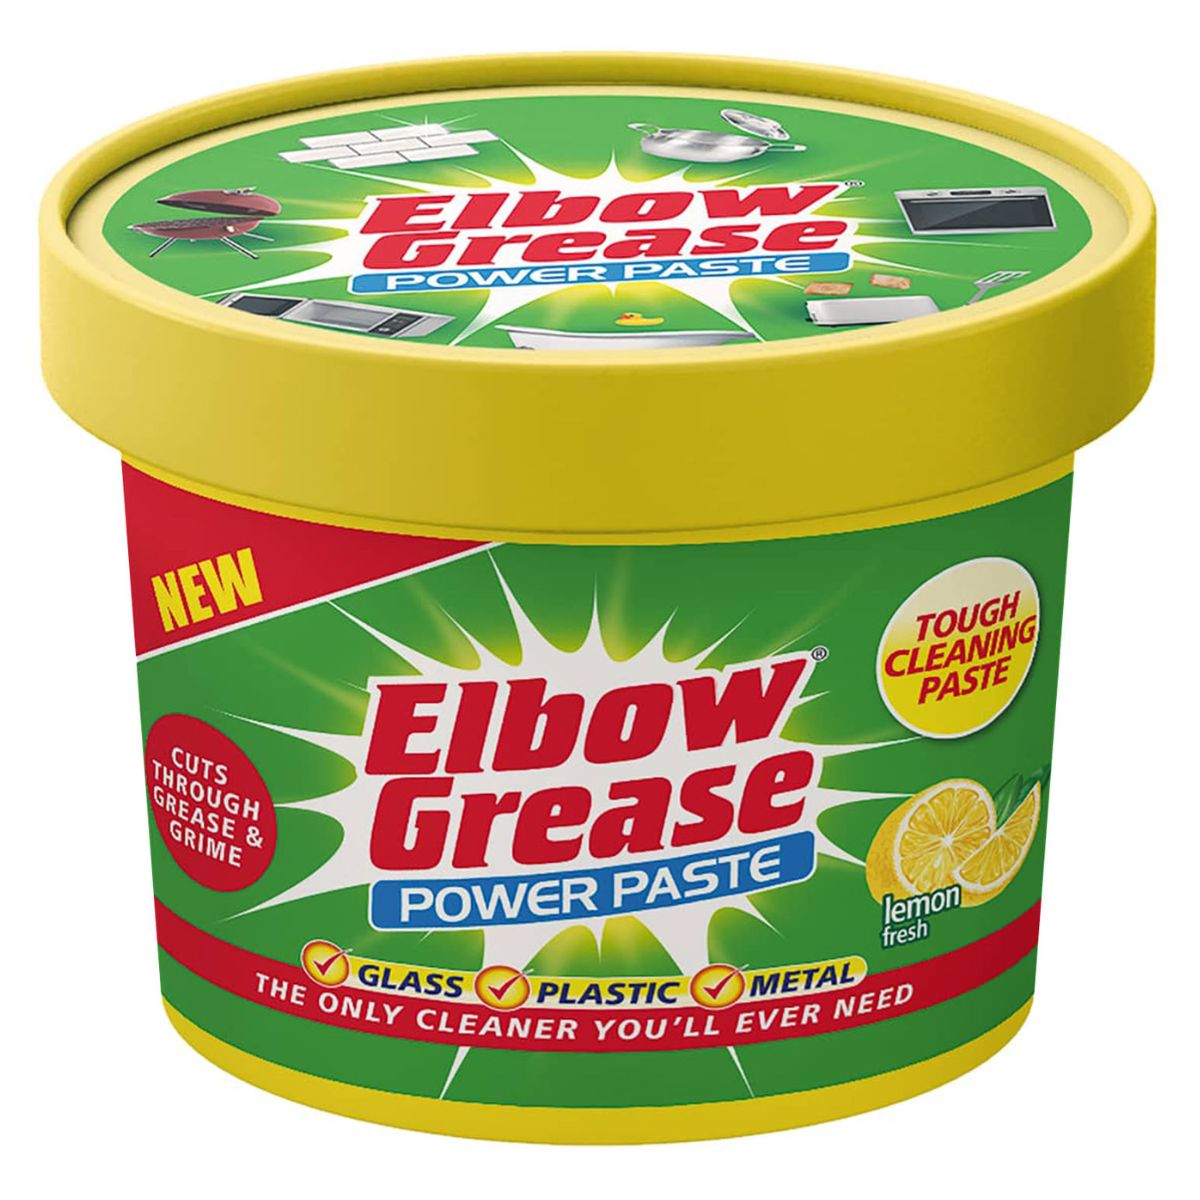 A yellow tub of Elbow Grease - Power Paste Multi Purpose Cleaner - 350g.